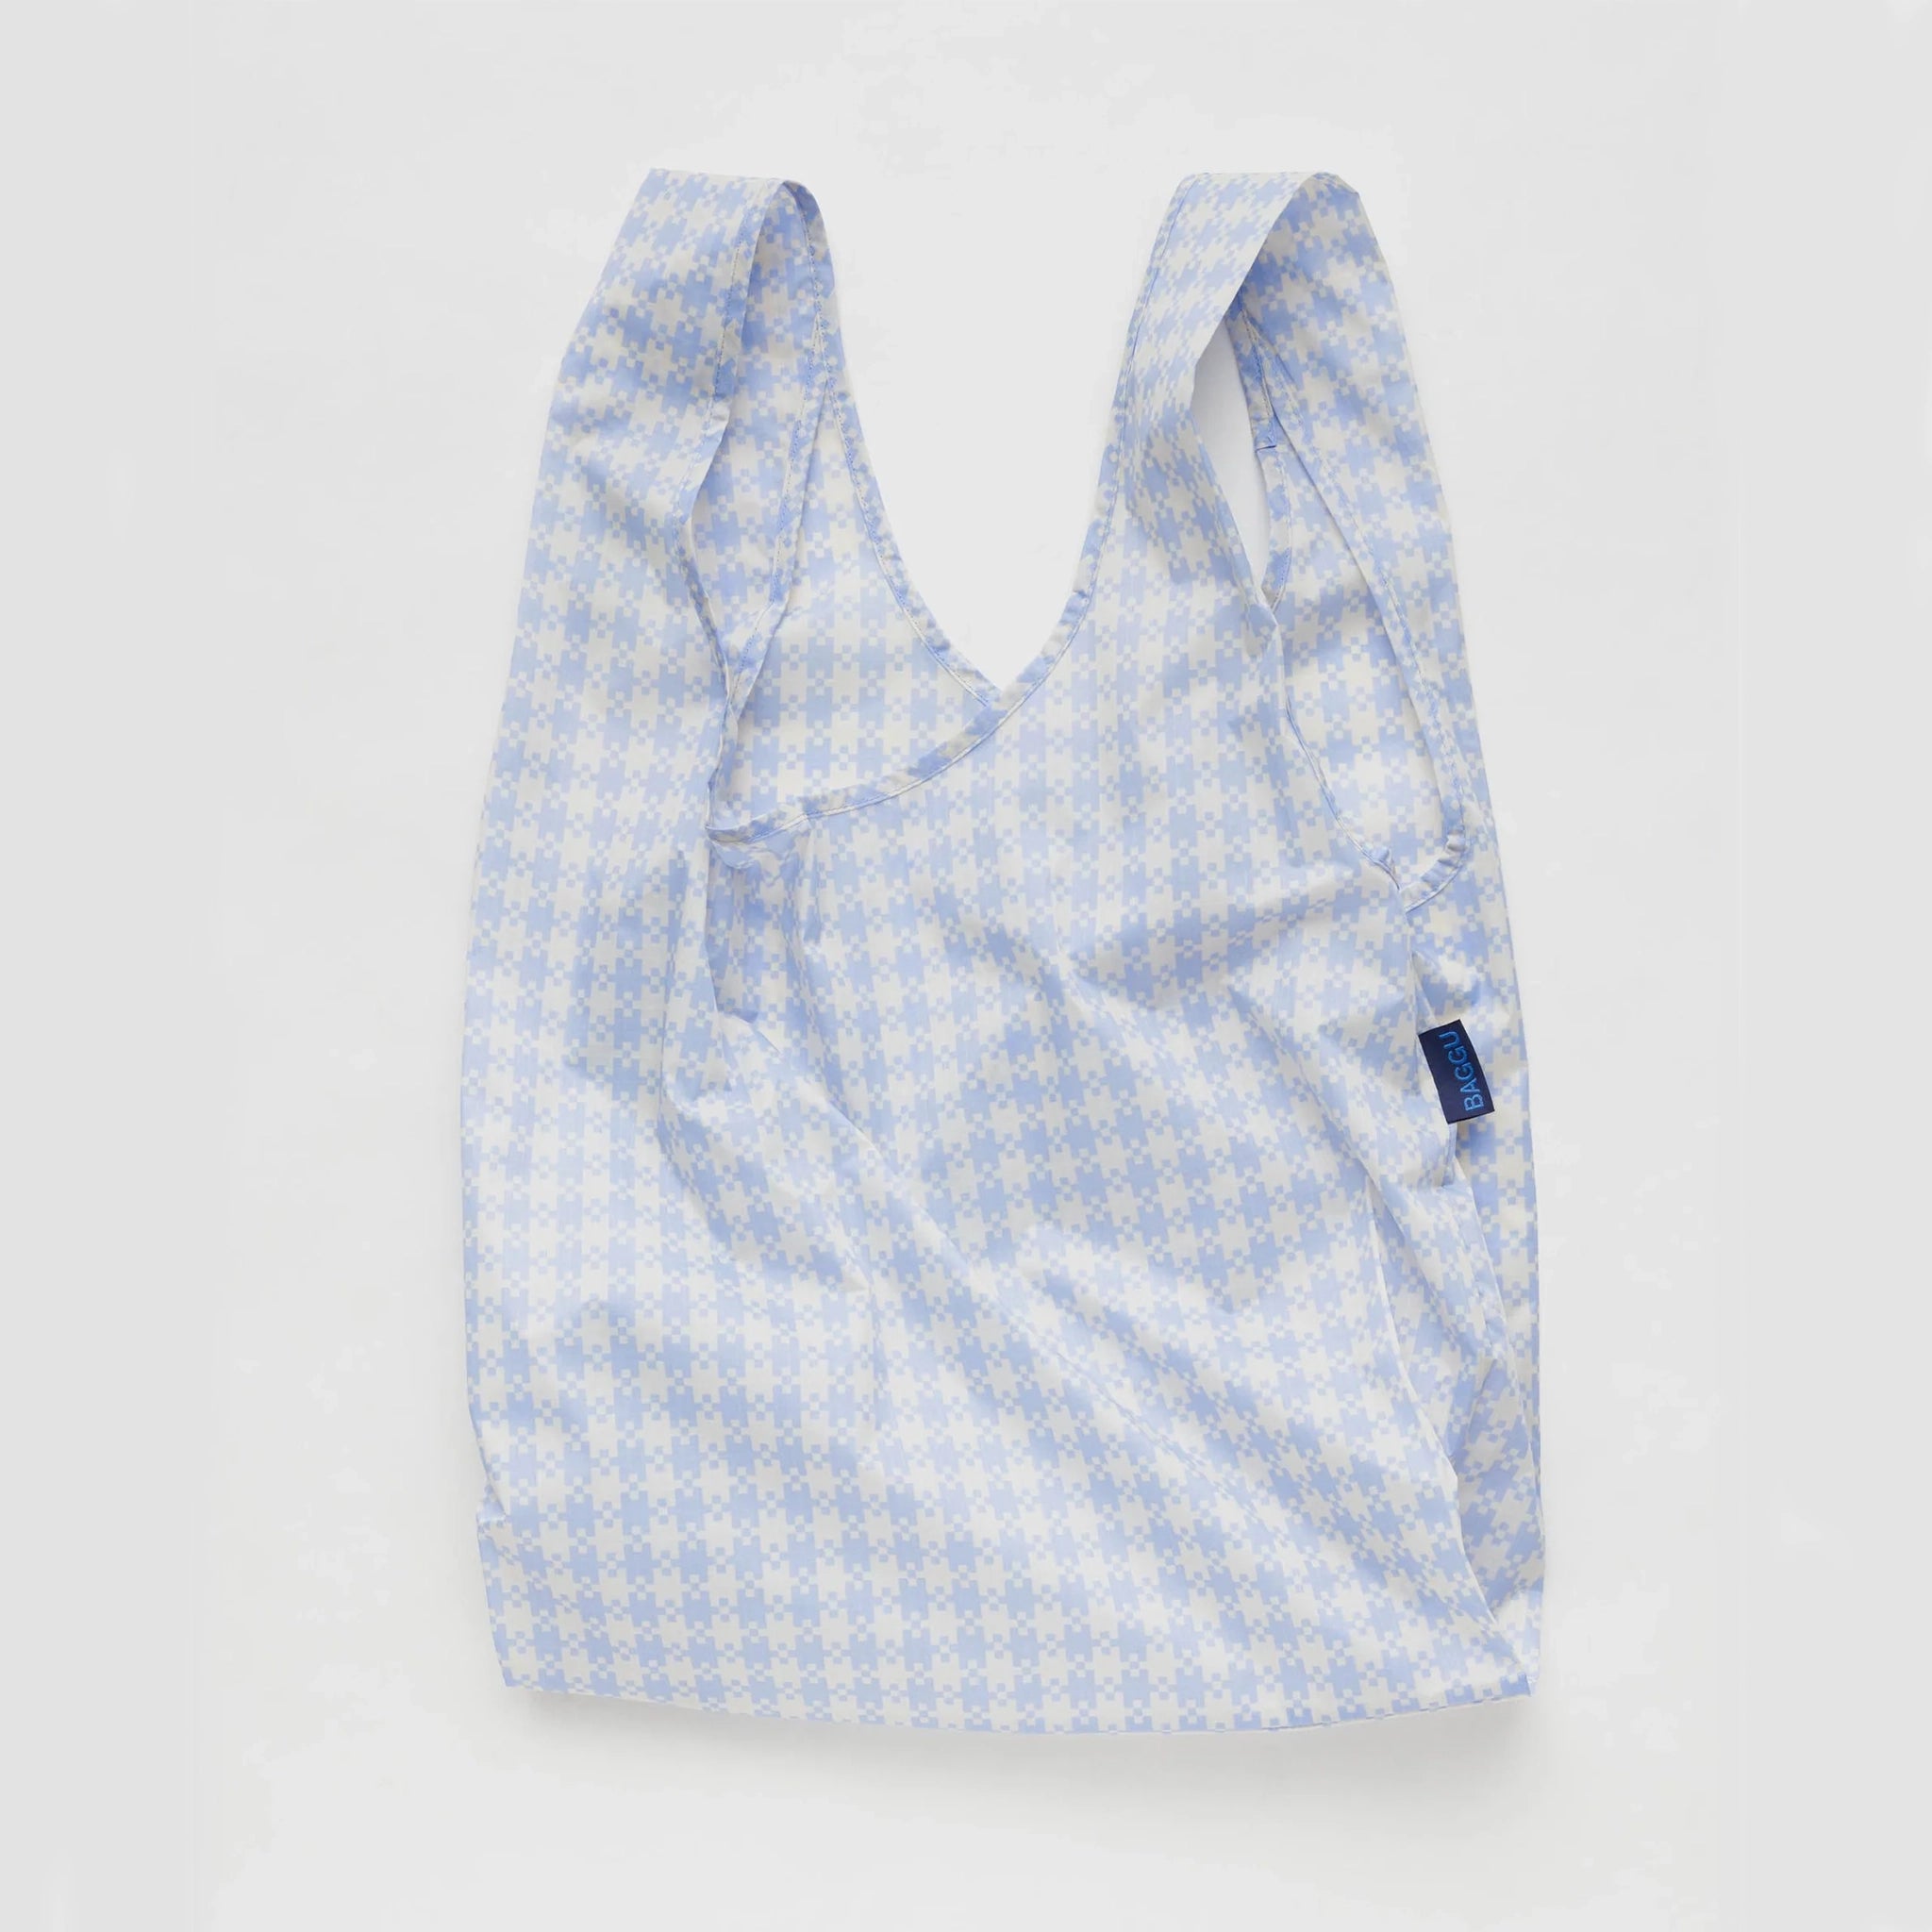 On a white background is a blue and white gingham printed nylon tote bag.